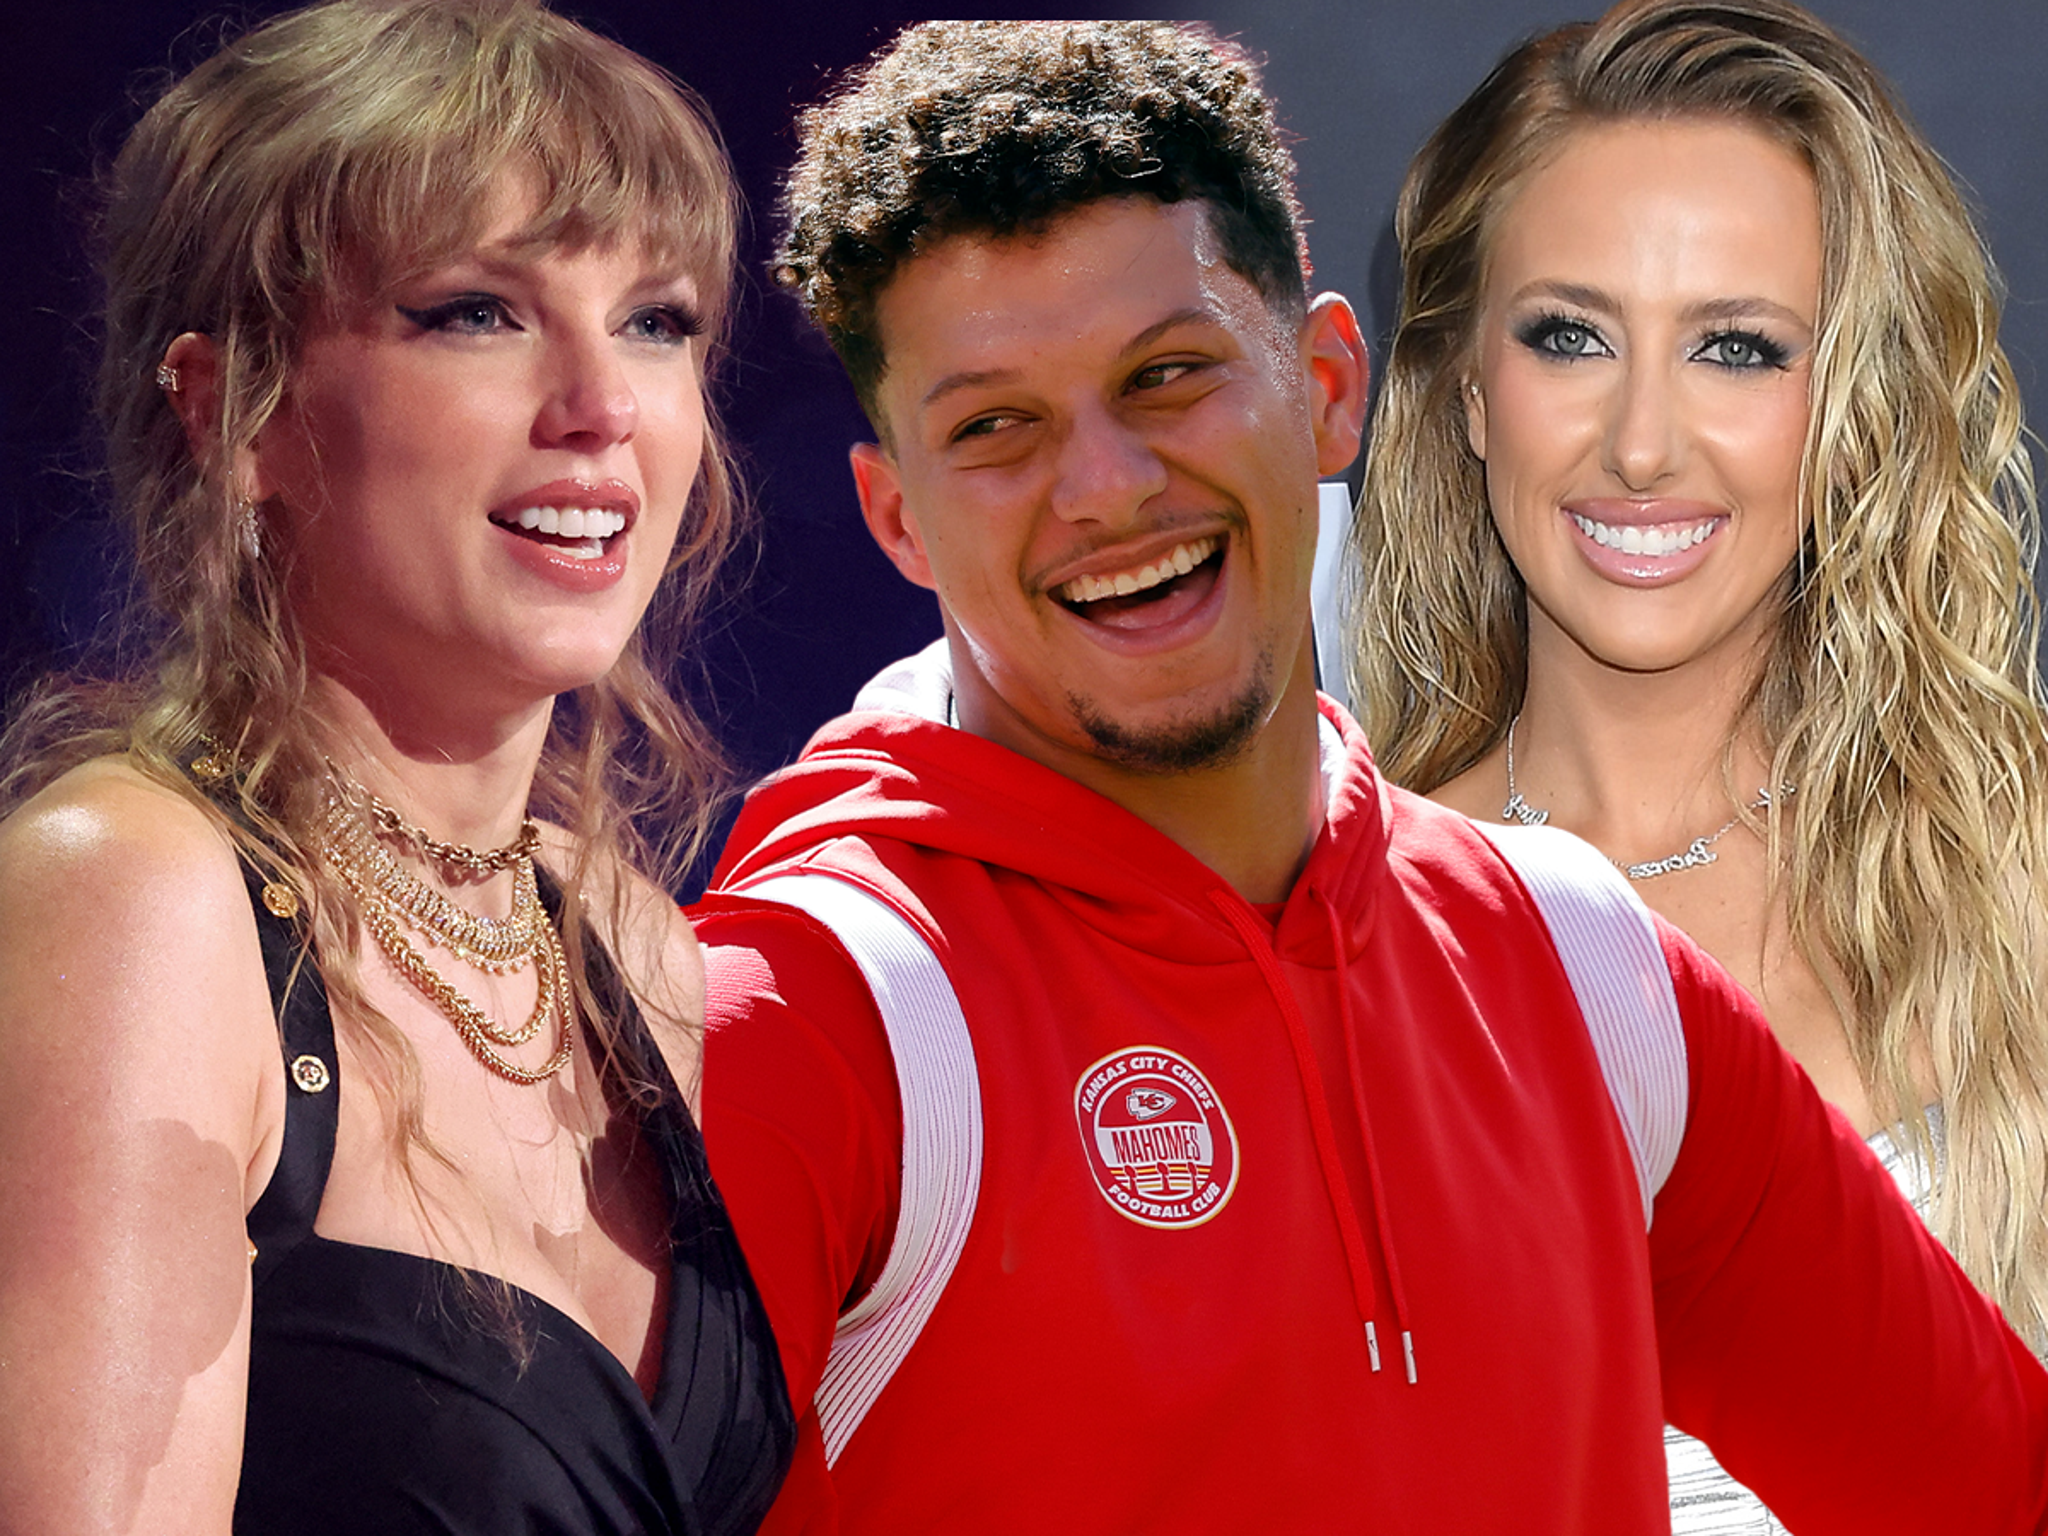 Patrick Mahomes cries out Jokely seeks for help after wife Brittany recent Attitude she got from Taylor swift 